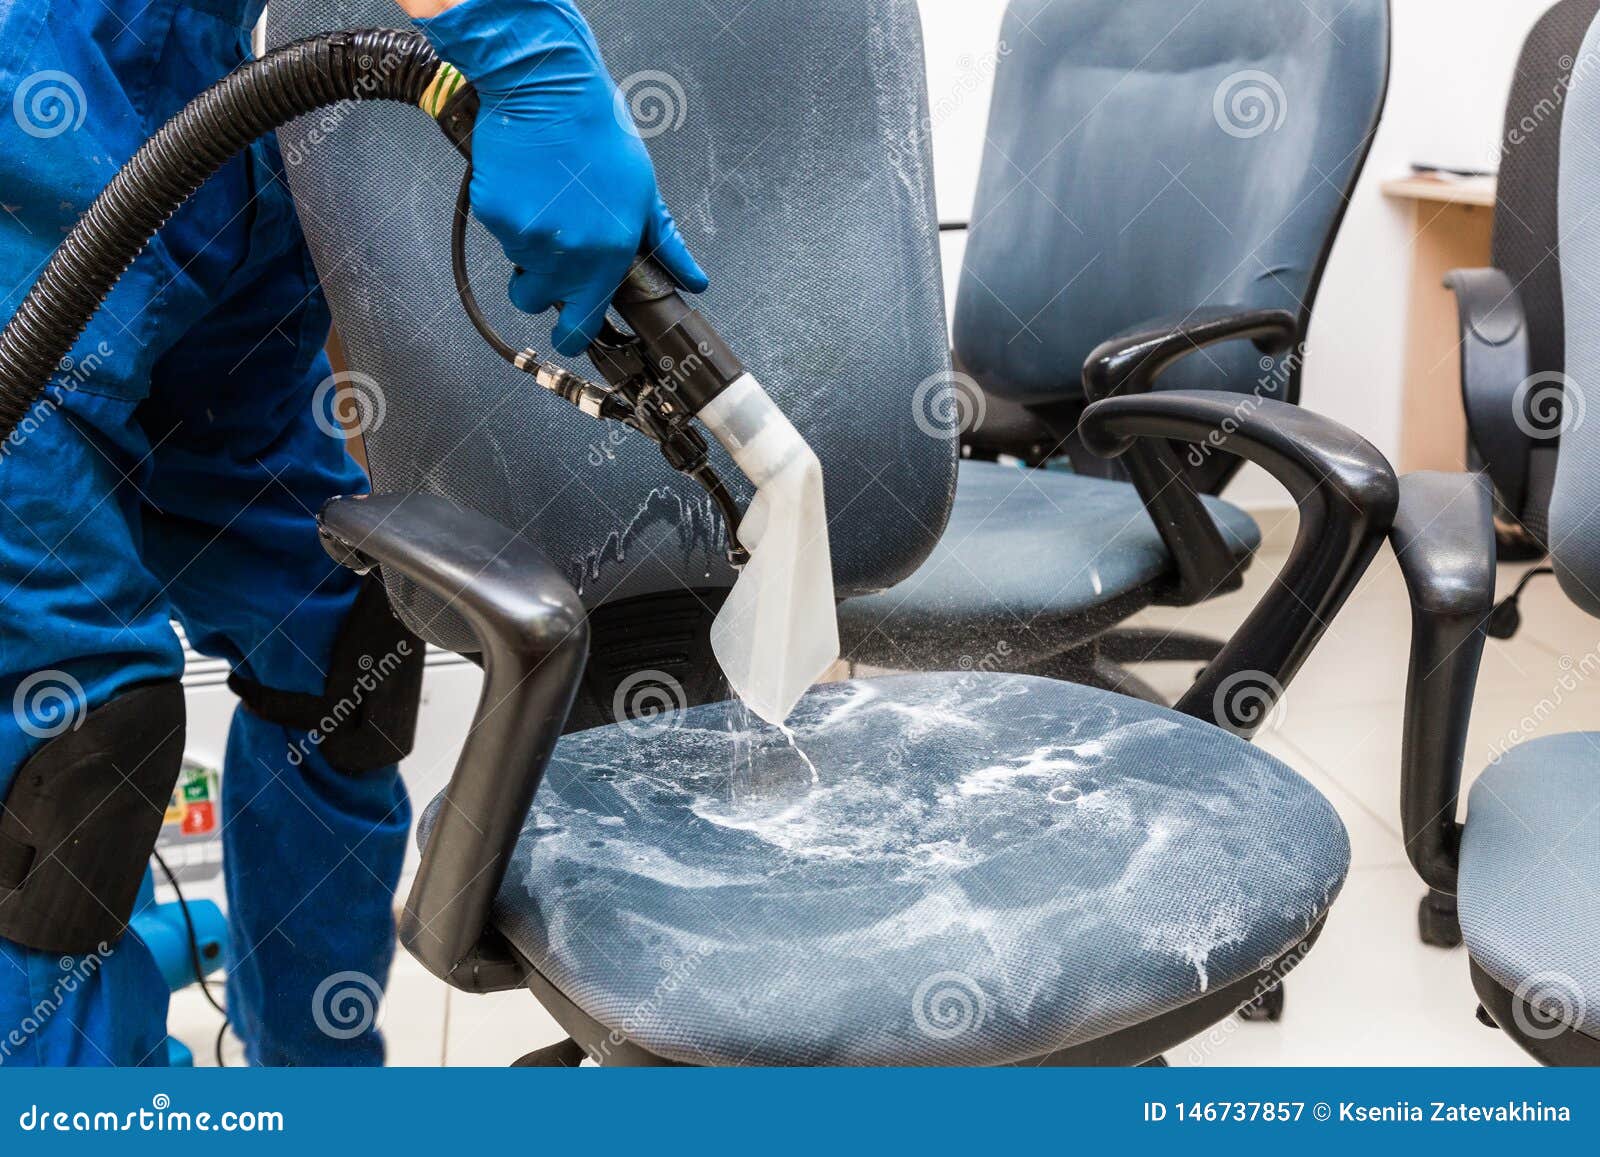 Young Man In Workwear And Rubber Gloves Cleans The Office Chair